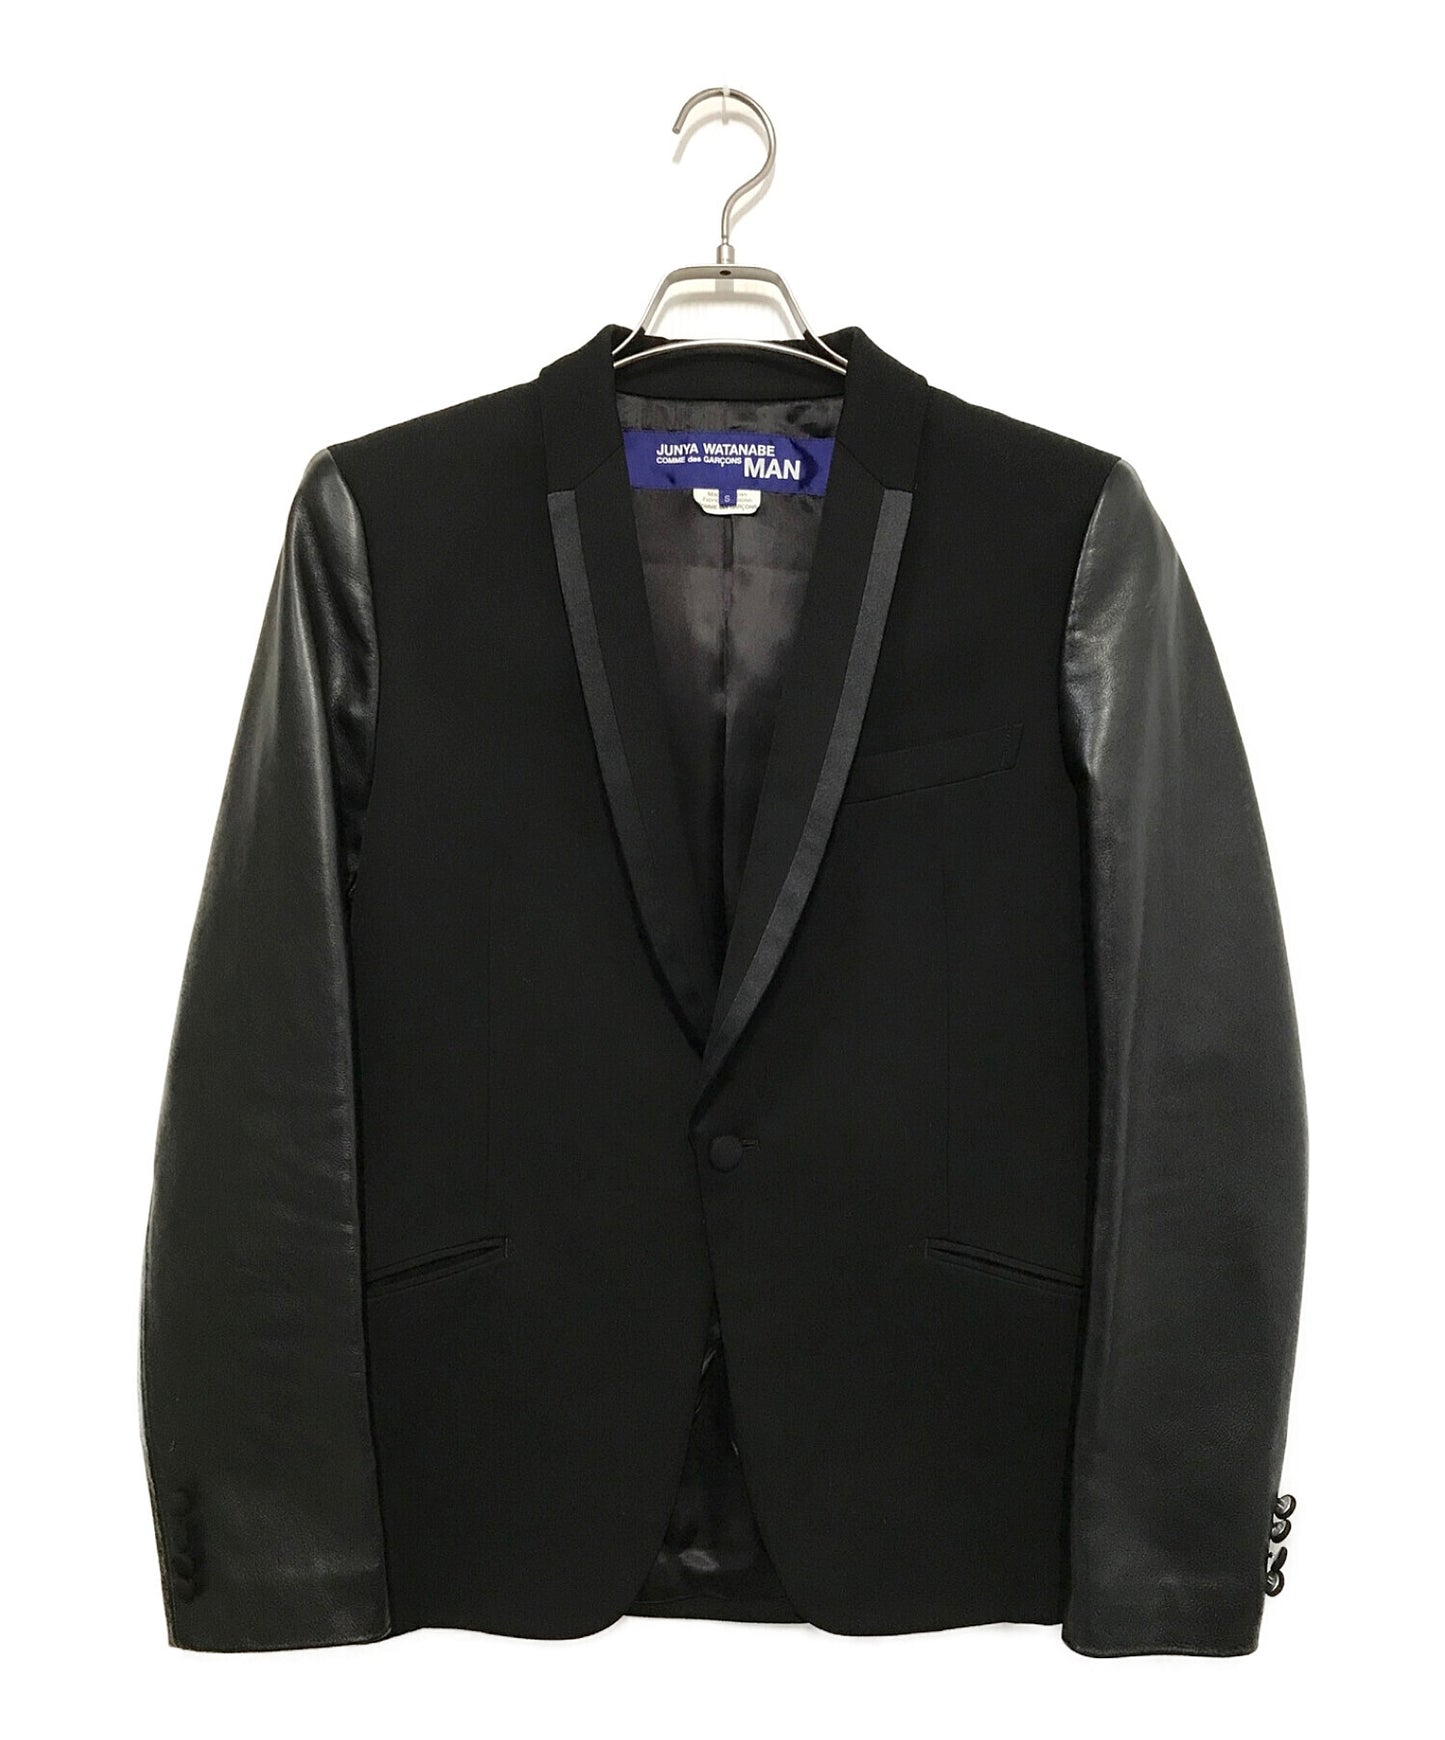 [Pre-owned] JUNYA WATANABE CdG MAN Tailored Jacket with Leather Switching WP-J003